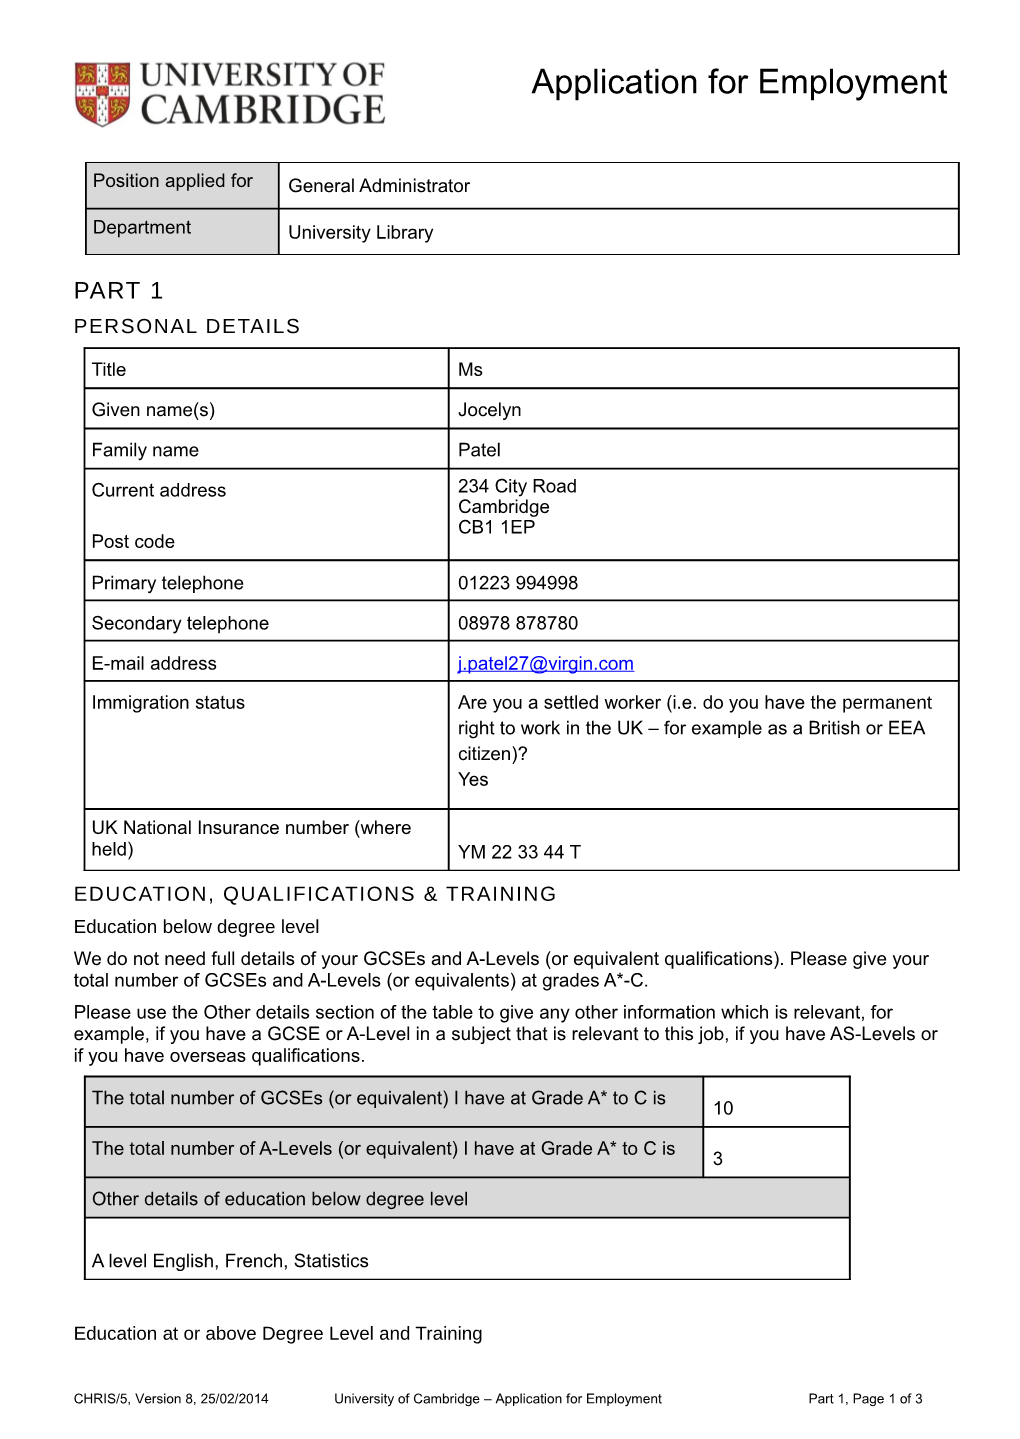 Application for Employment s109